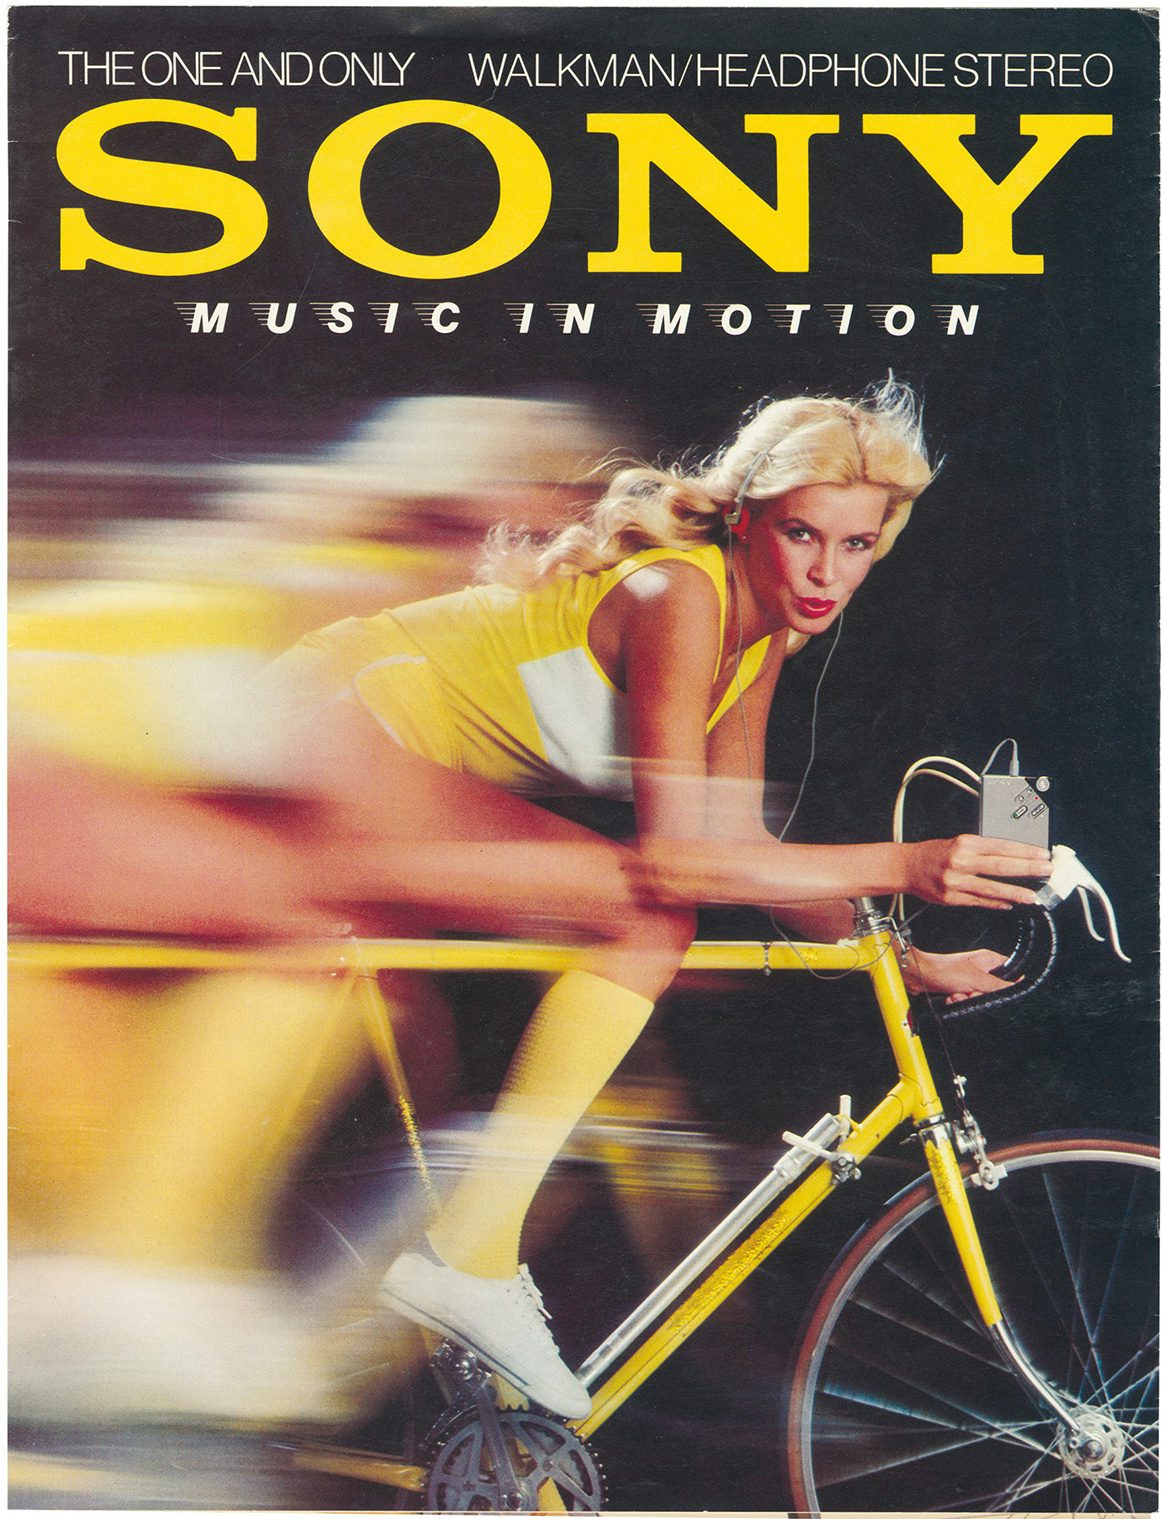 Sony Walkman poster showing a motion blurred image of a person dressed in yellow clothing and exposed legs while riding a bike and holding a walkman